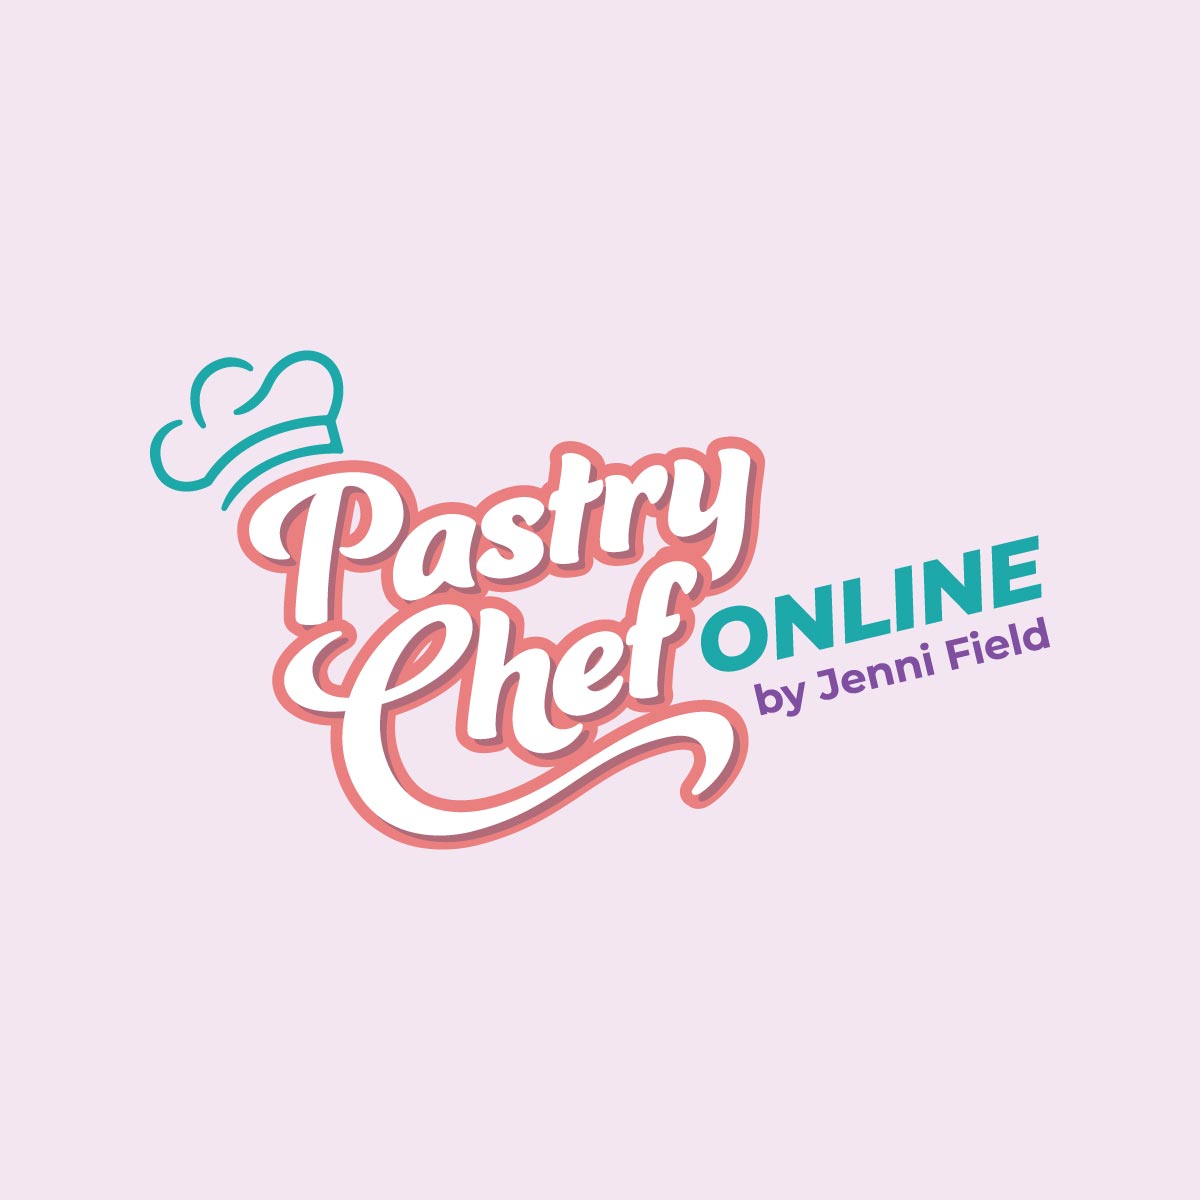 Pastry Chef Online Main Logo full color on light background